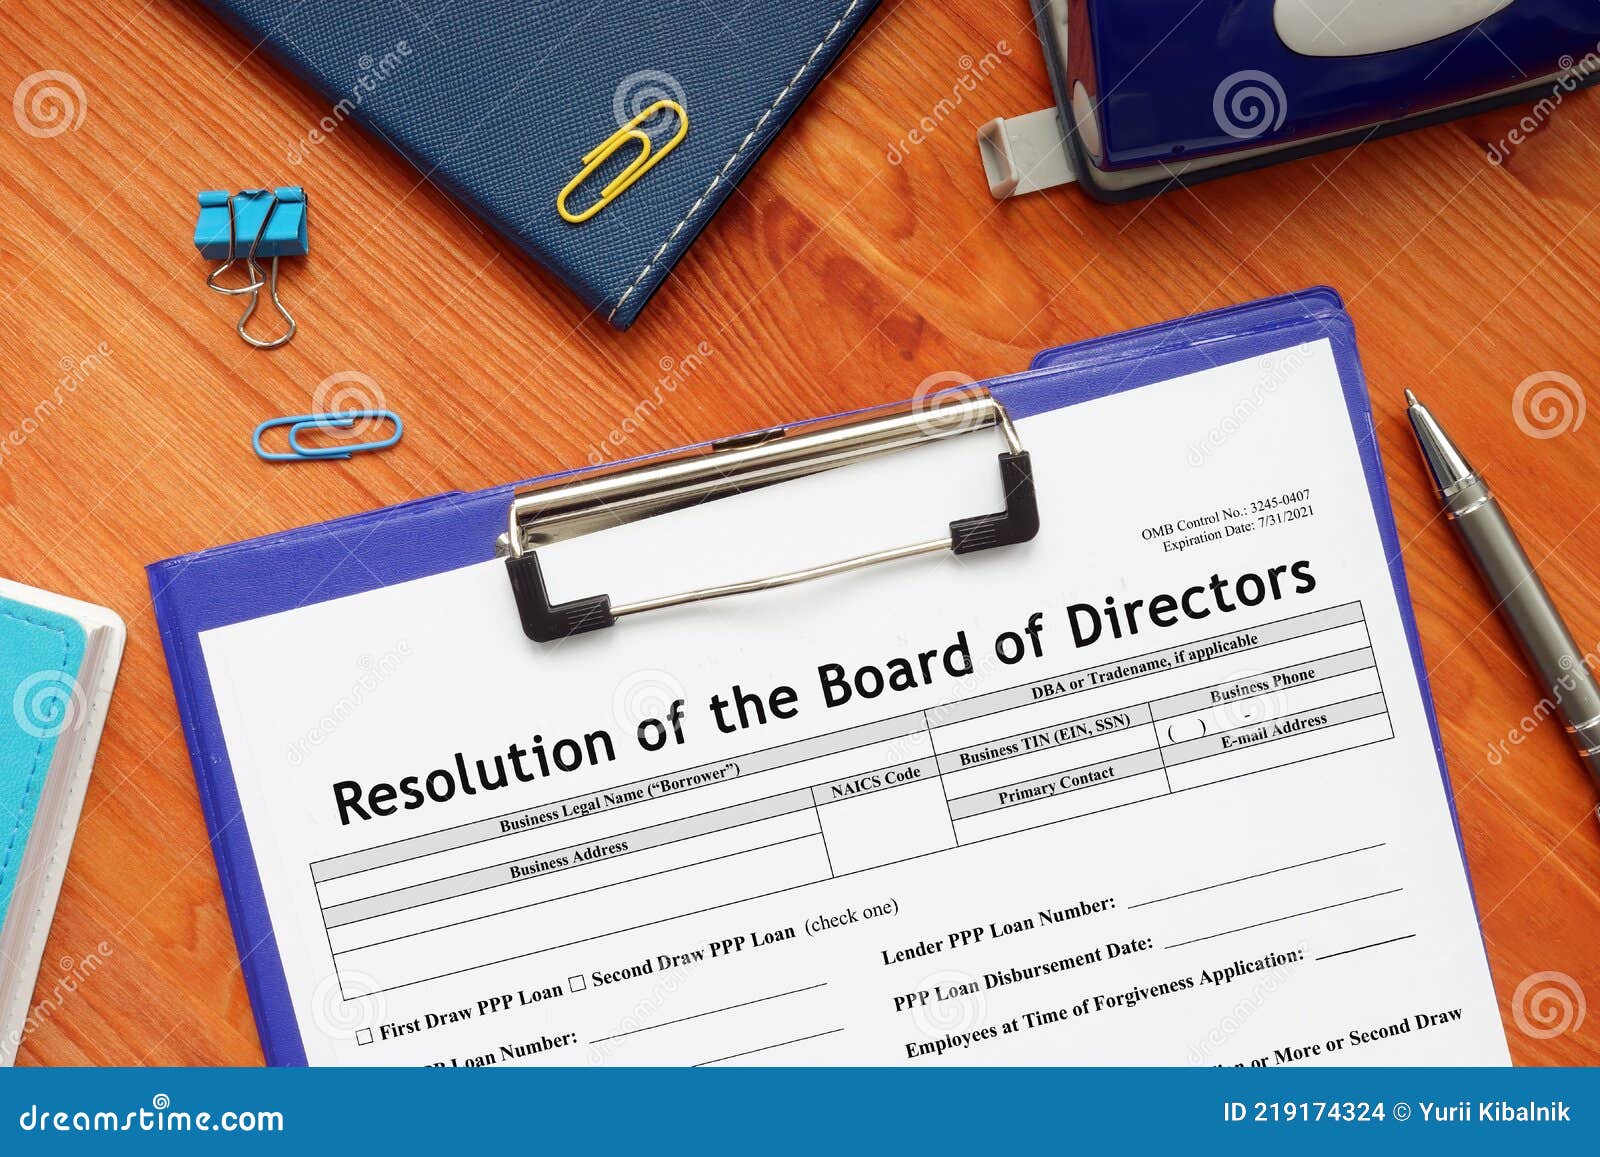 sba form 1528 resolution of the board of directors